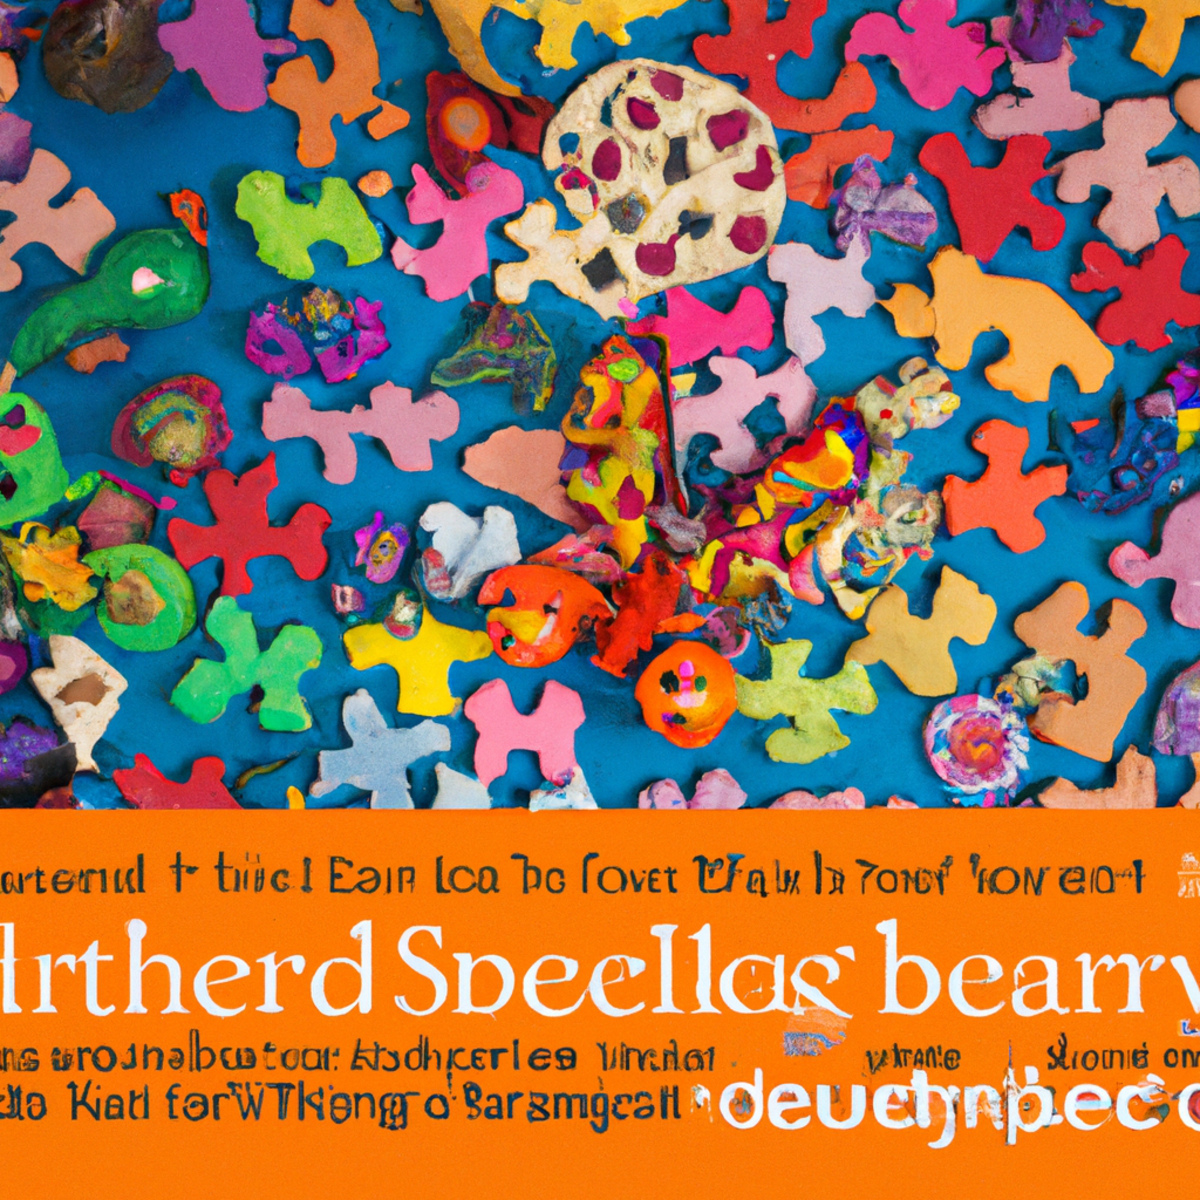 Vibrant puzzle pieces symbolize resilience and unity in Trichorhinophalangeal Syndrome community.